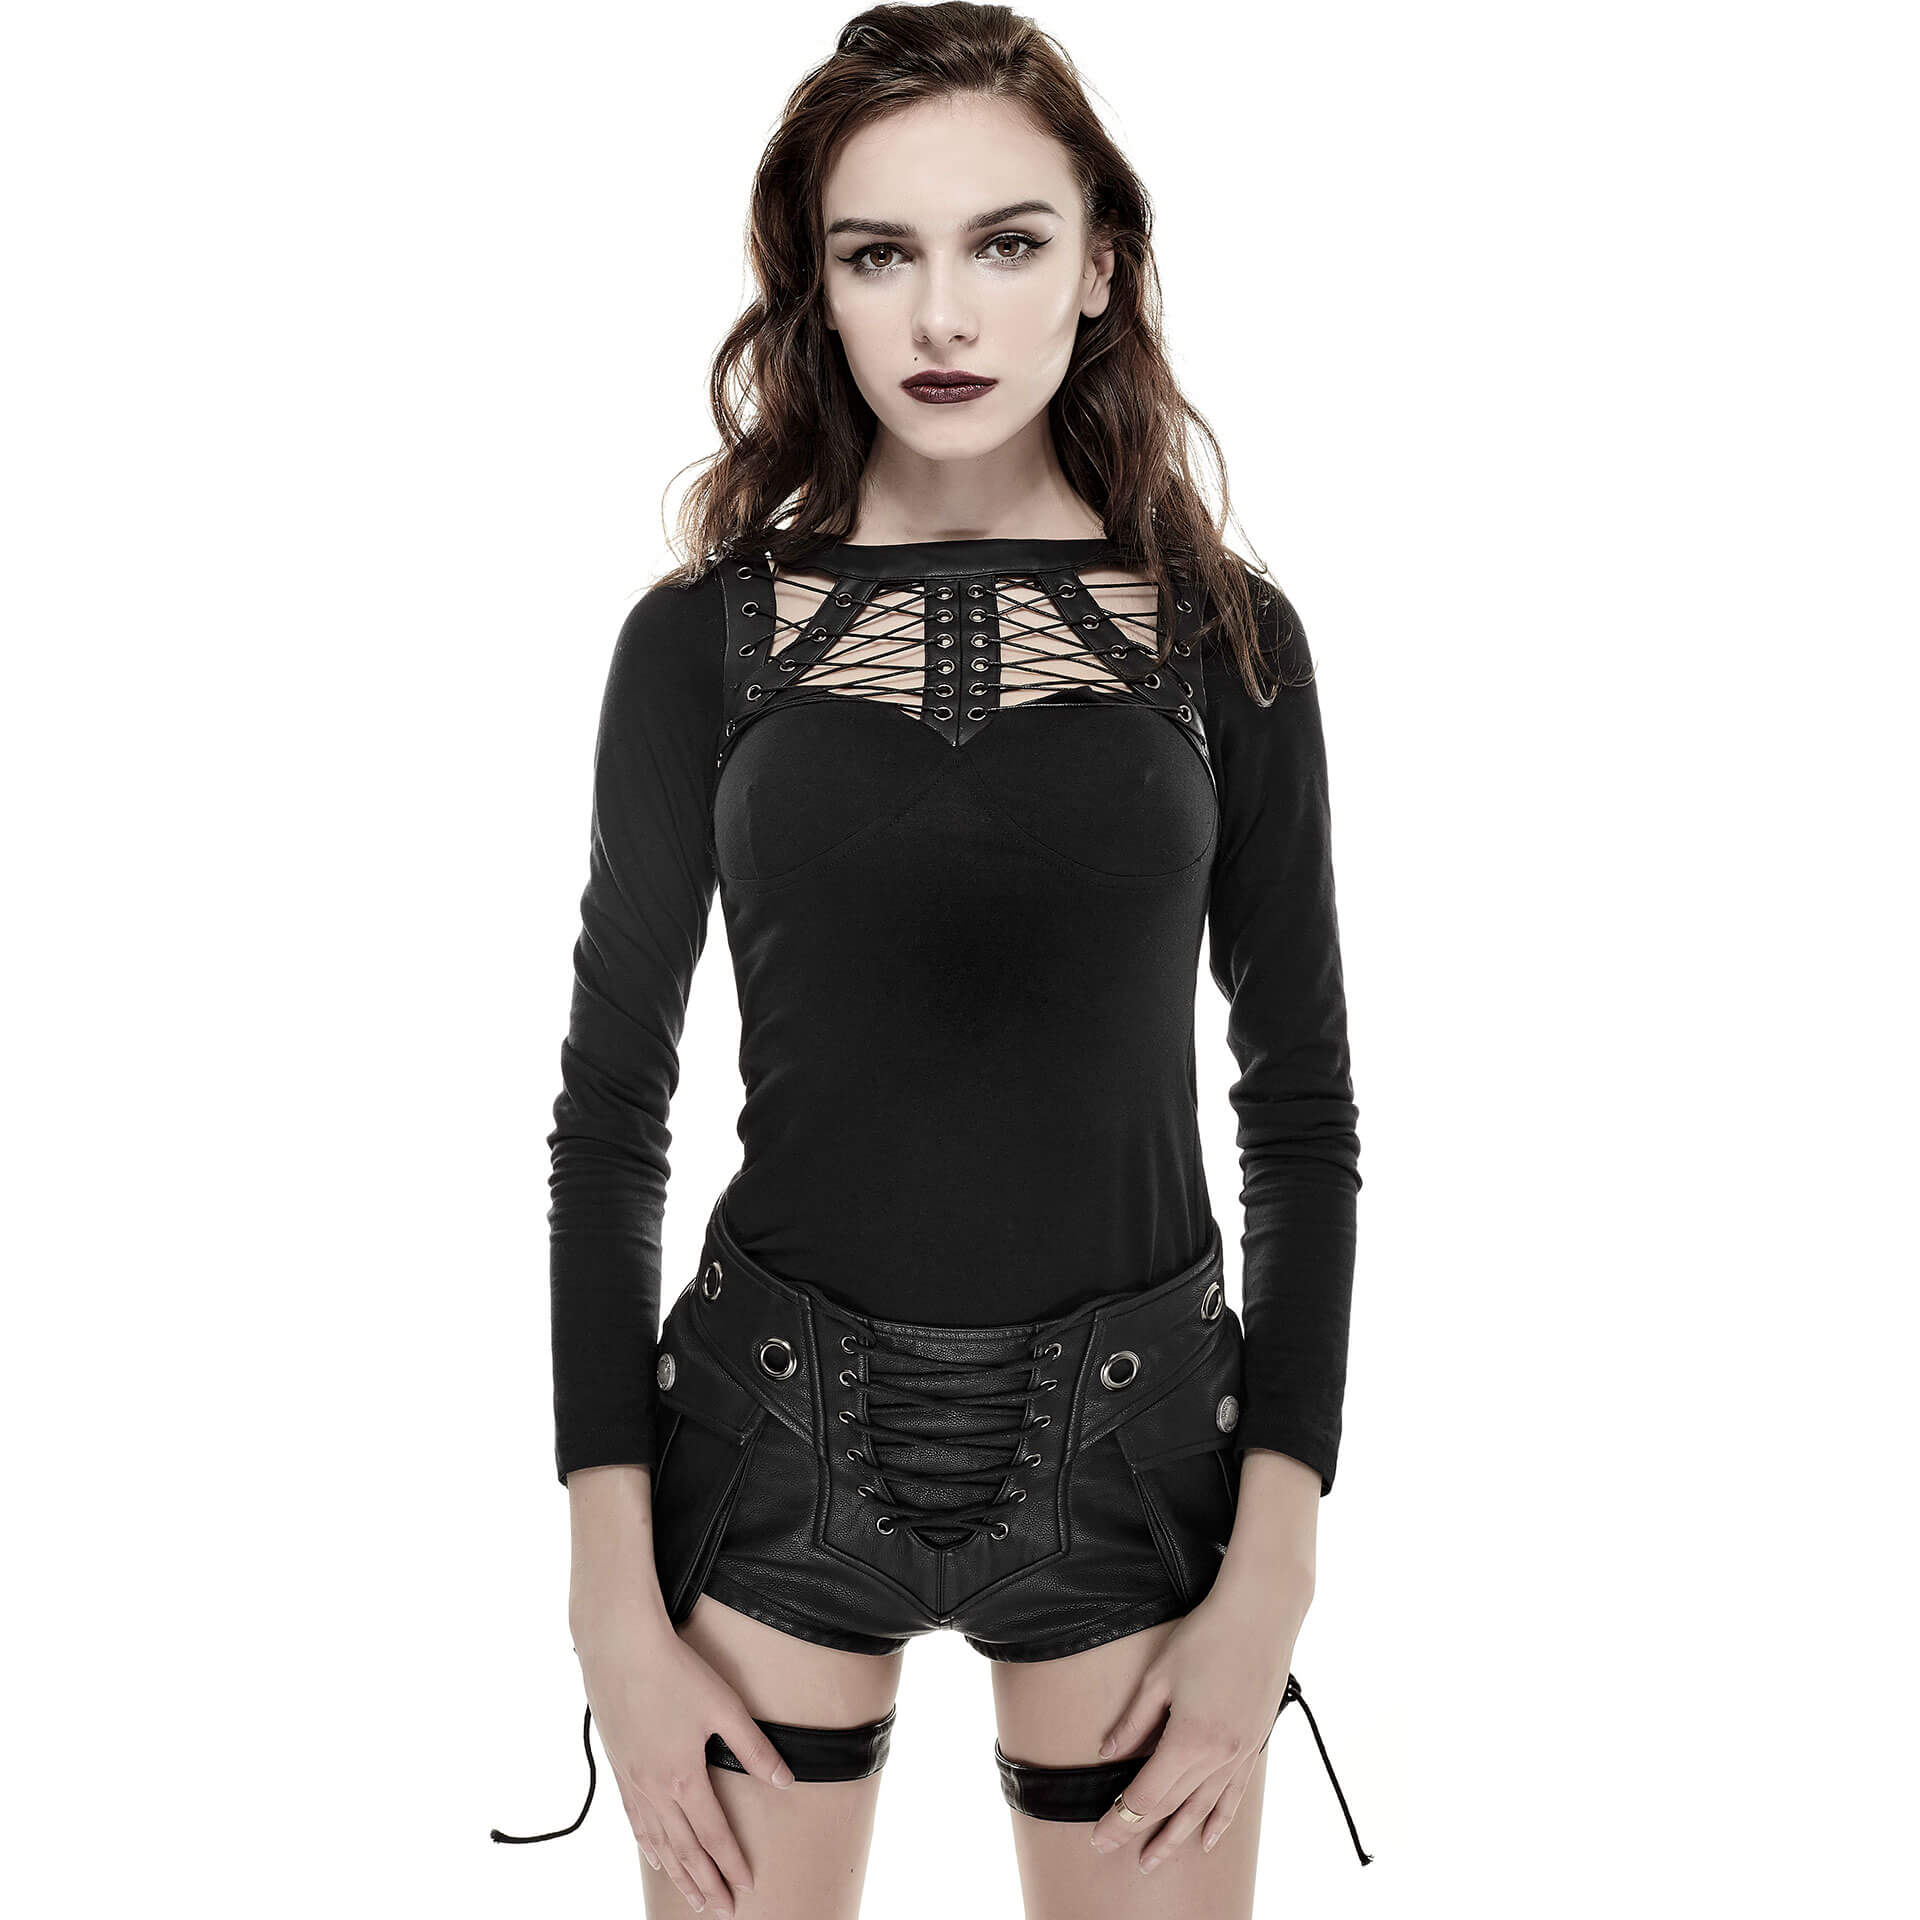 Nautilus Top by Punk Rave brand